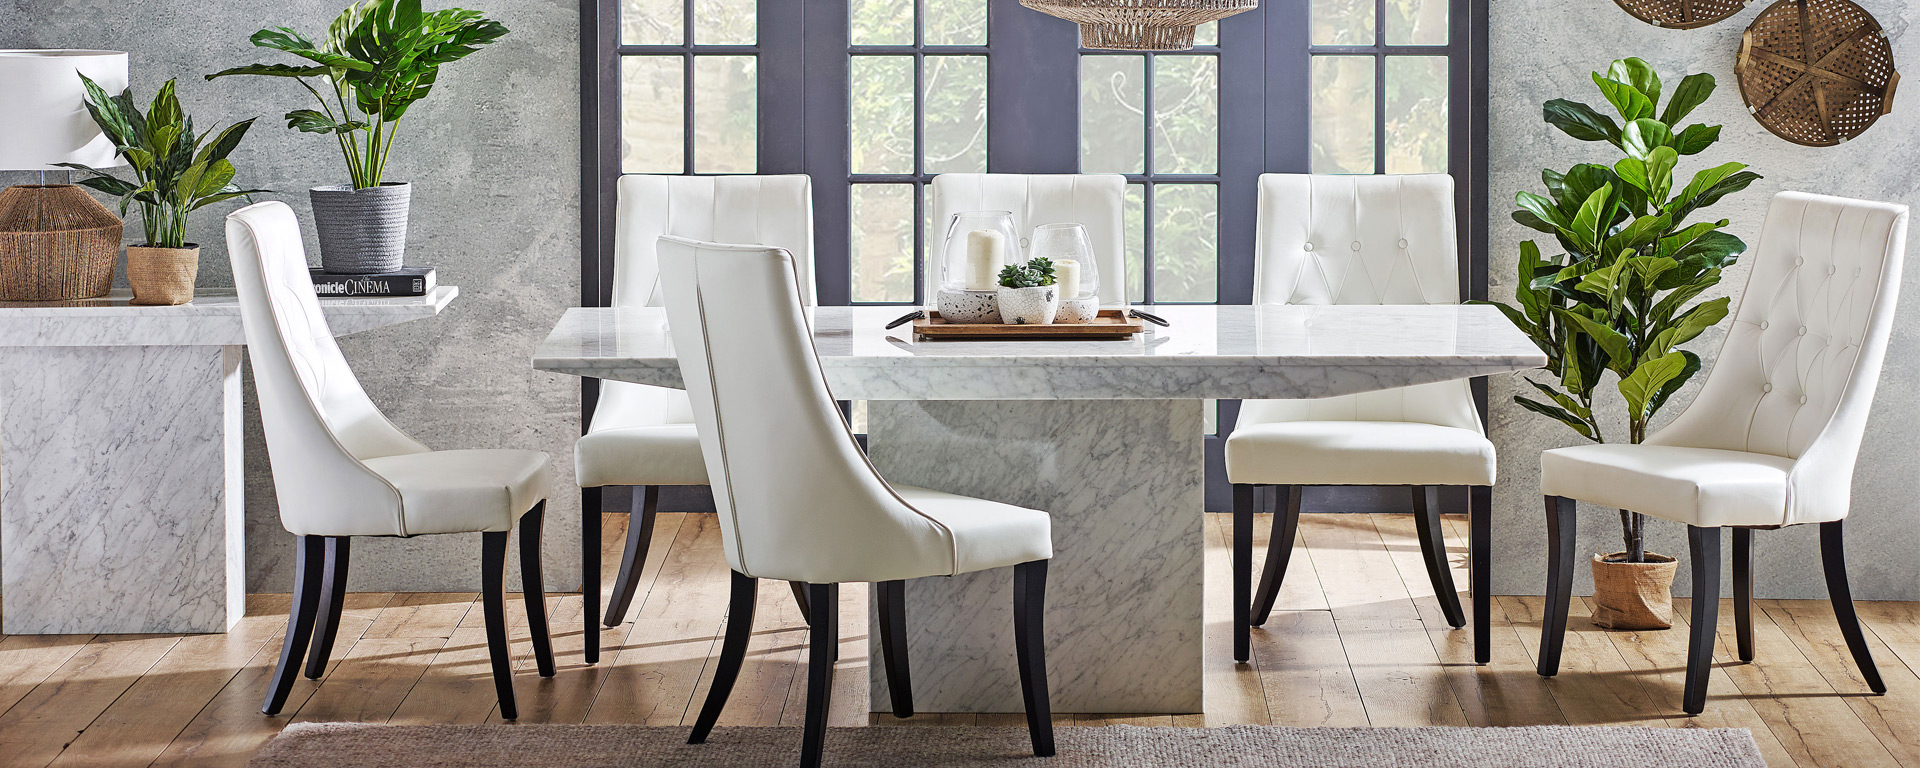 Dining Room Goals 5 Trending Concrete And Stone Dining regarding sizing 1920 X 768